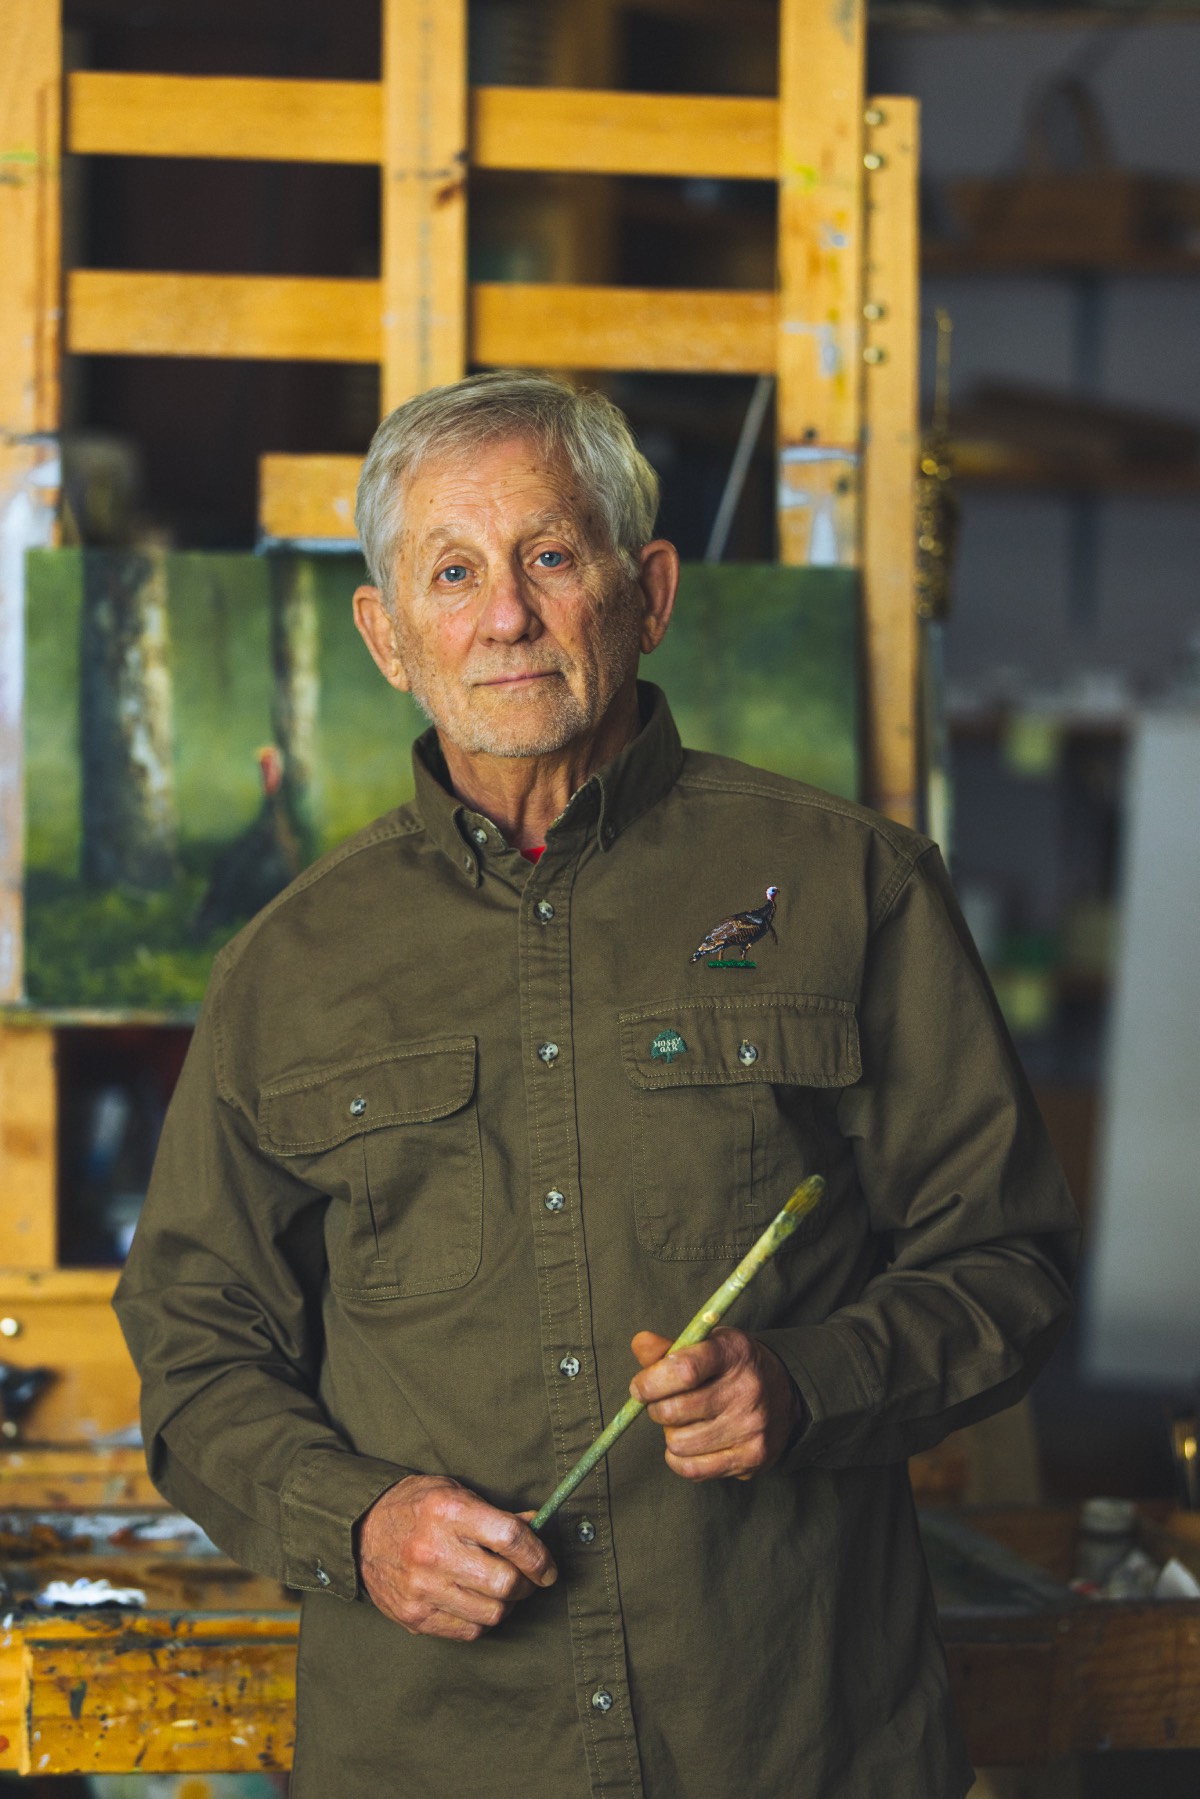 bob Tompkins stands with paintbrush